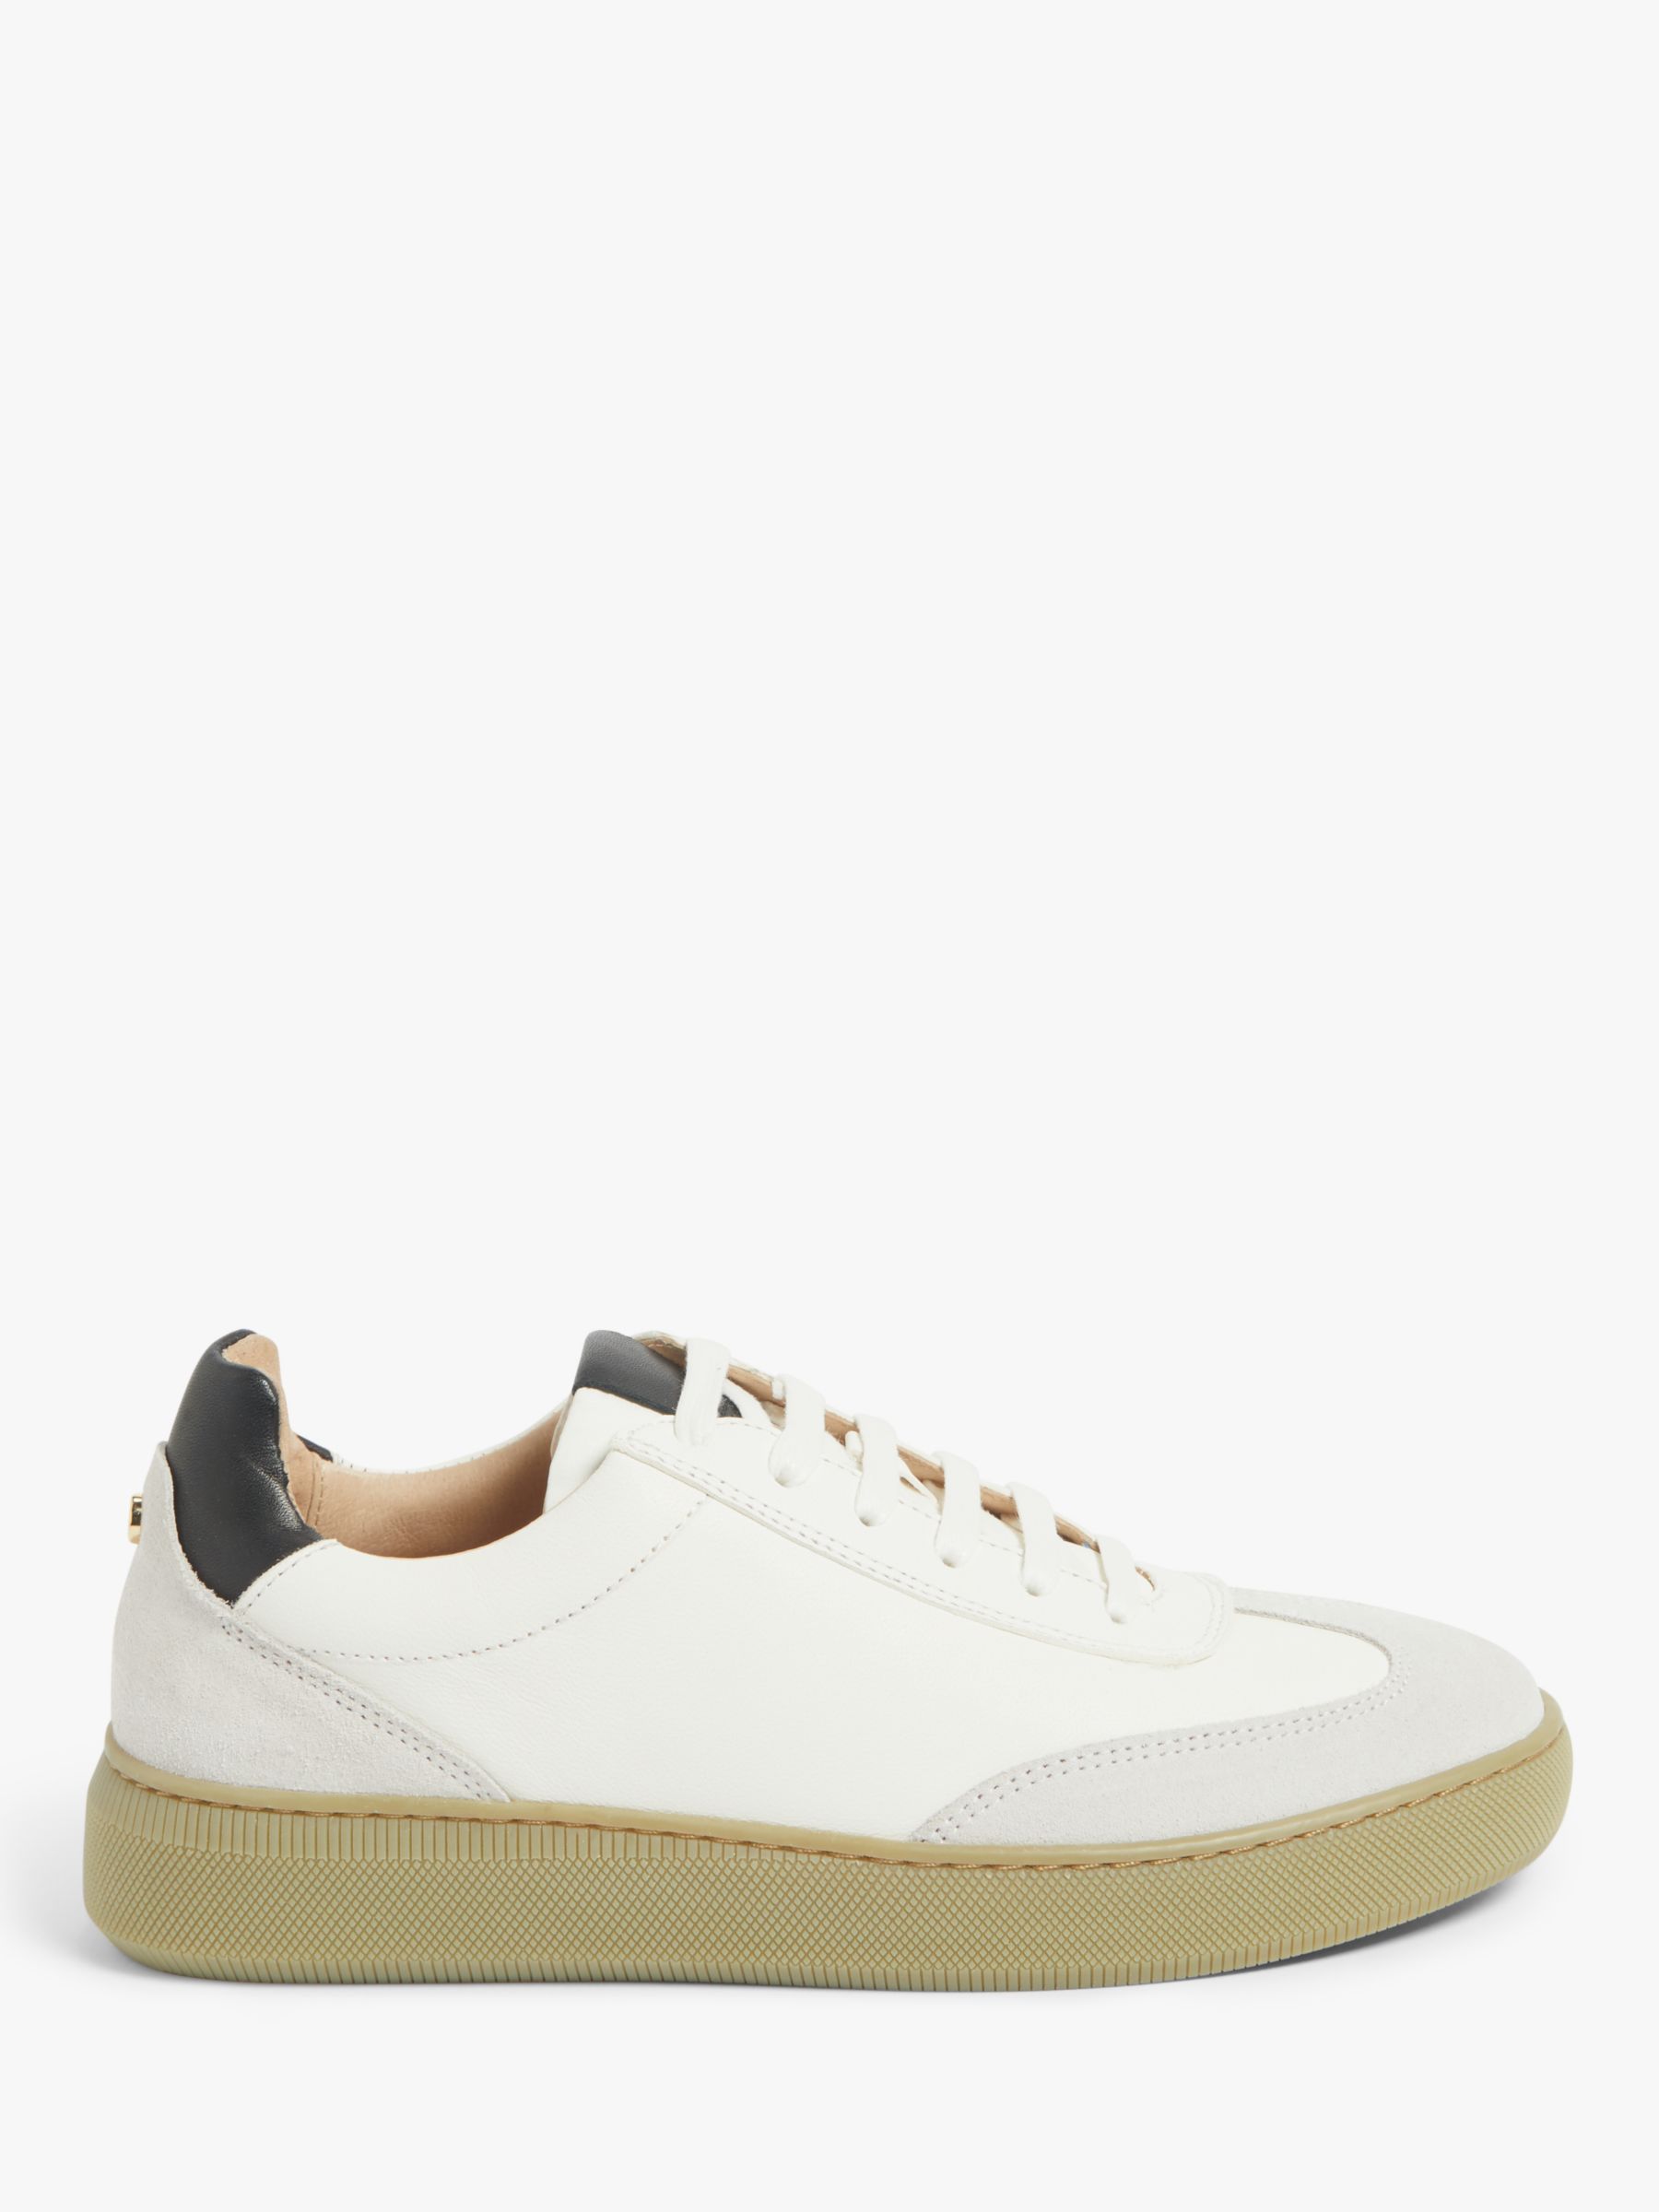 Racing Green Lewis White Leather Trainers